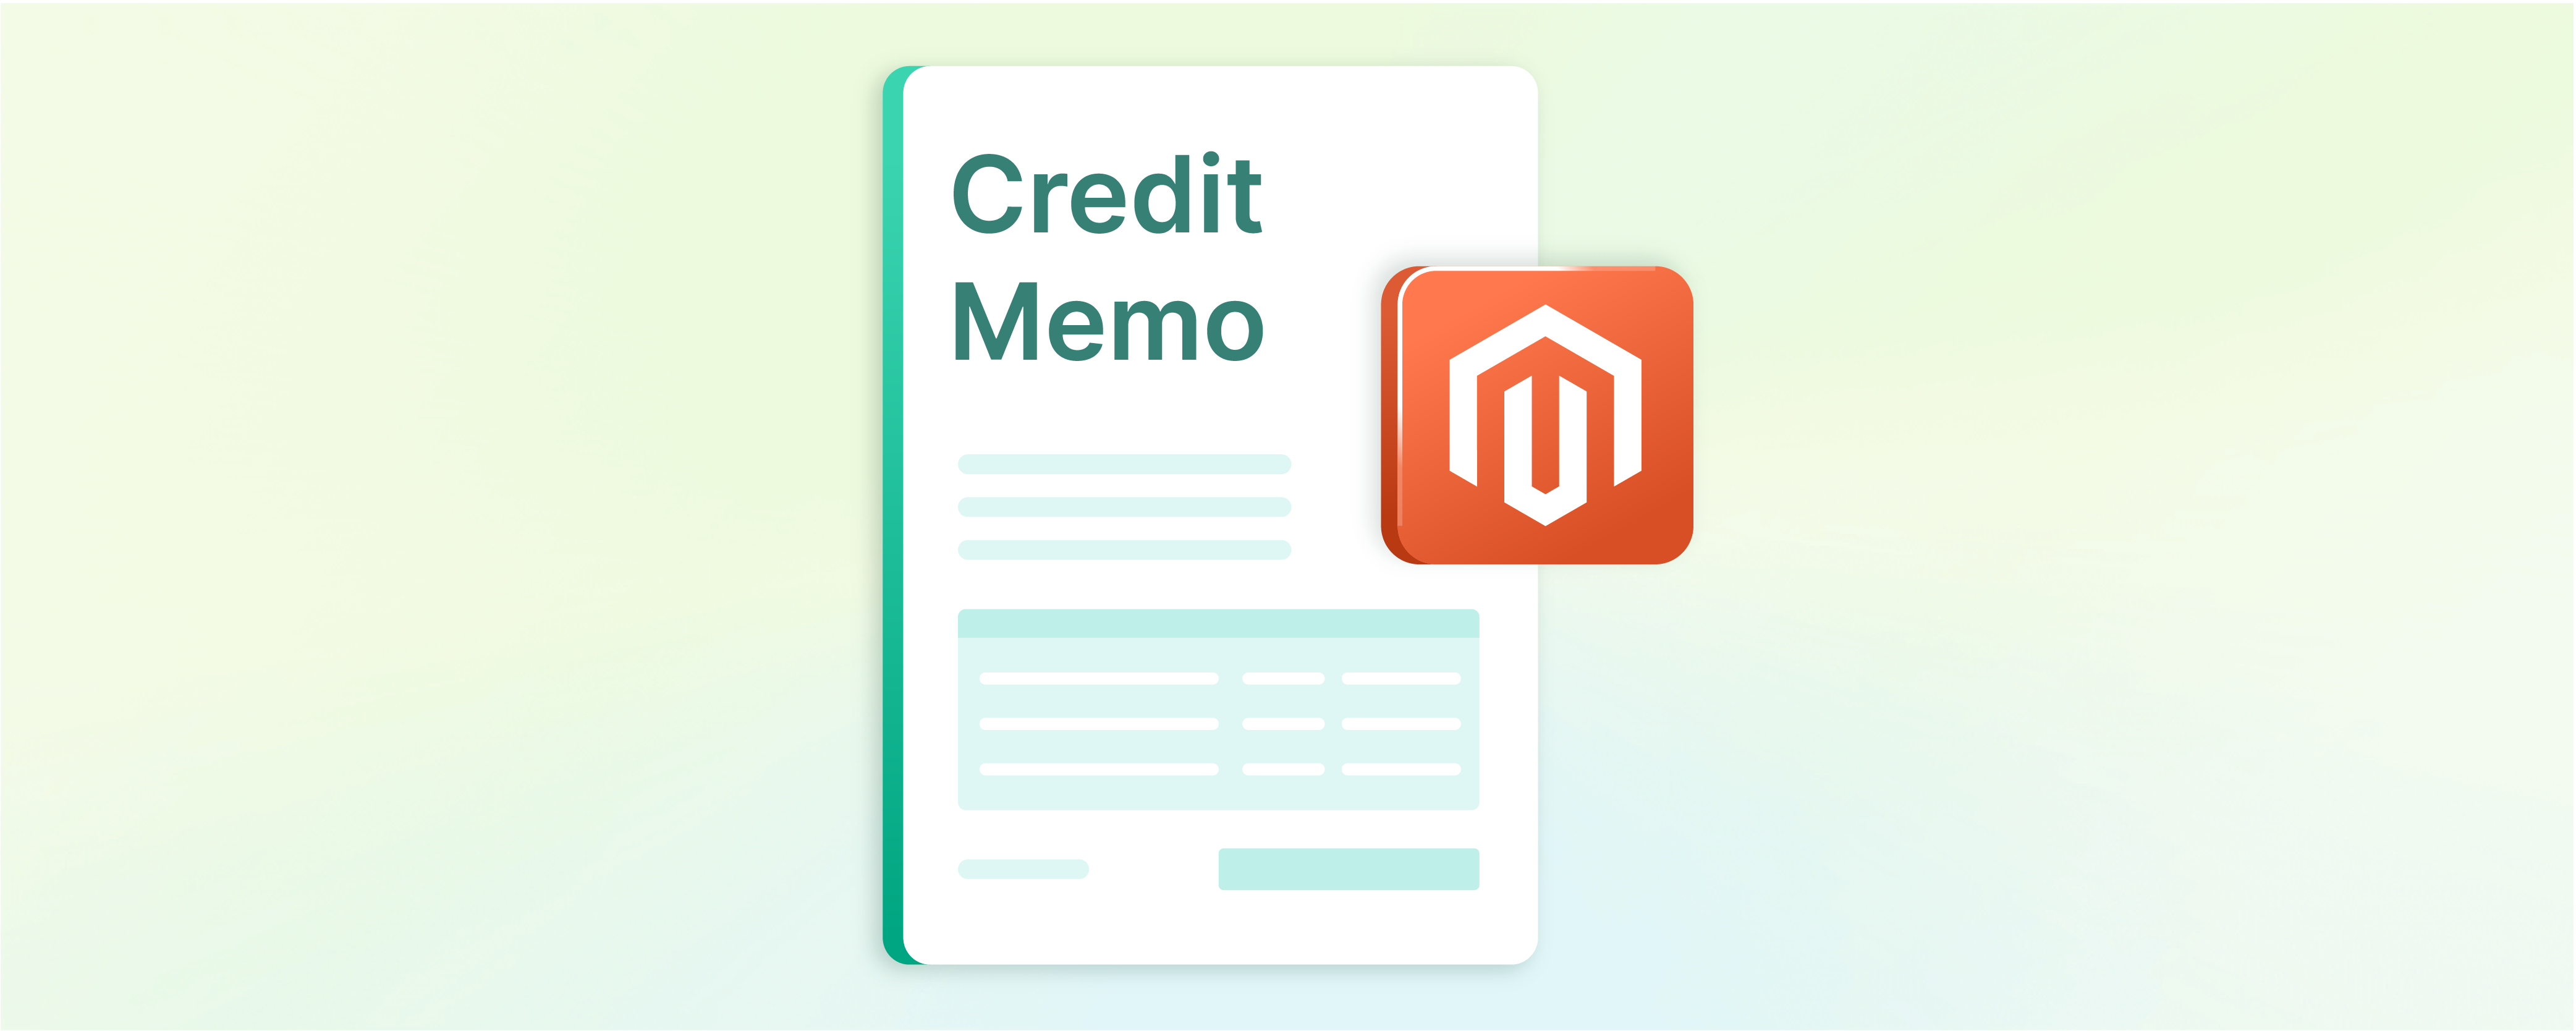 How to Create a Credit Memo in Magento 2?